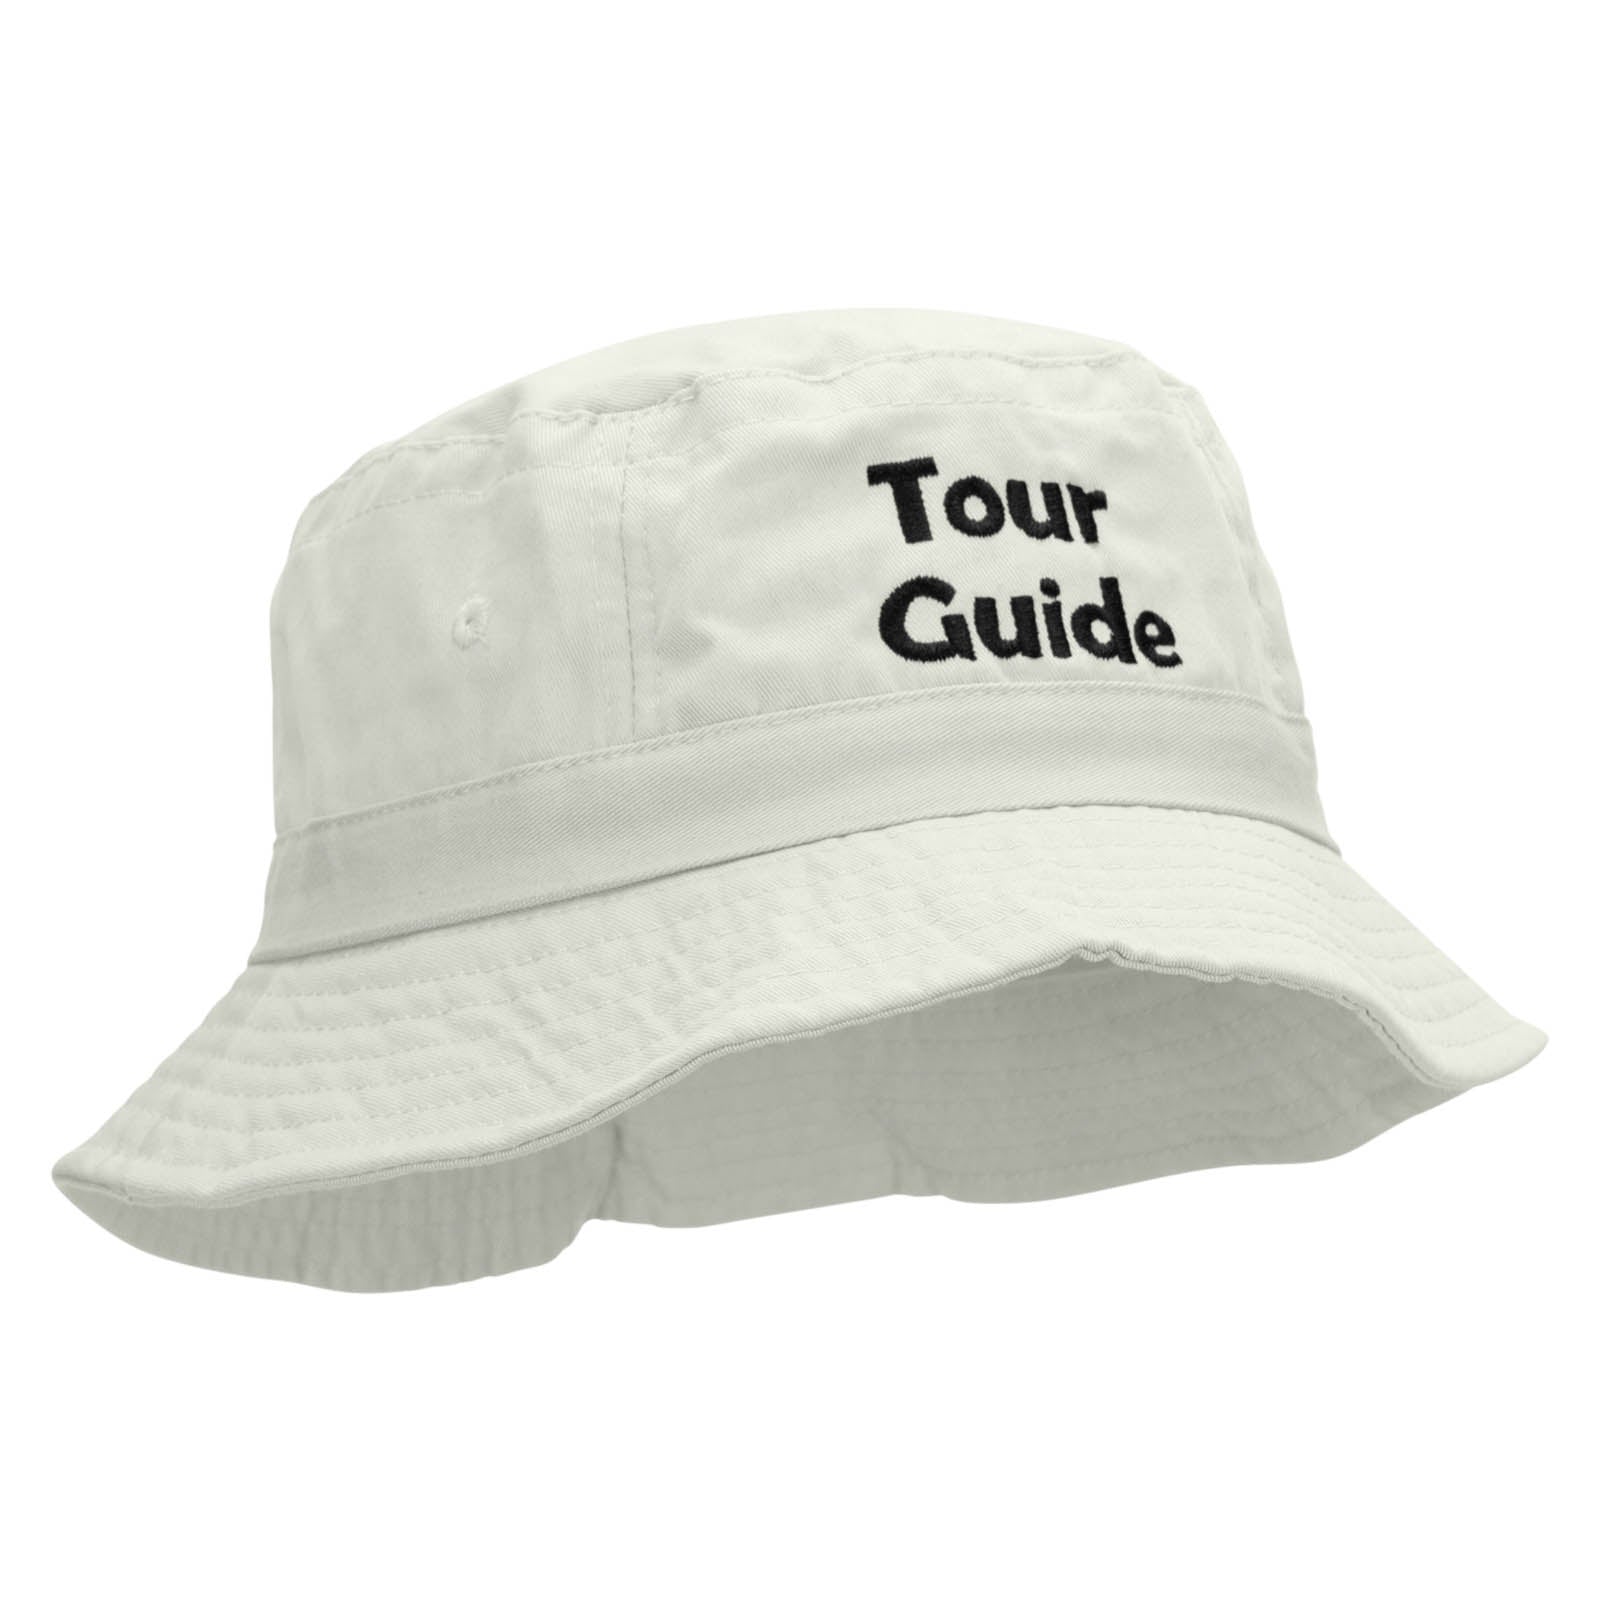 Tour Guide Embroidered Bucket Hat, White / One Size